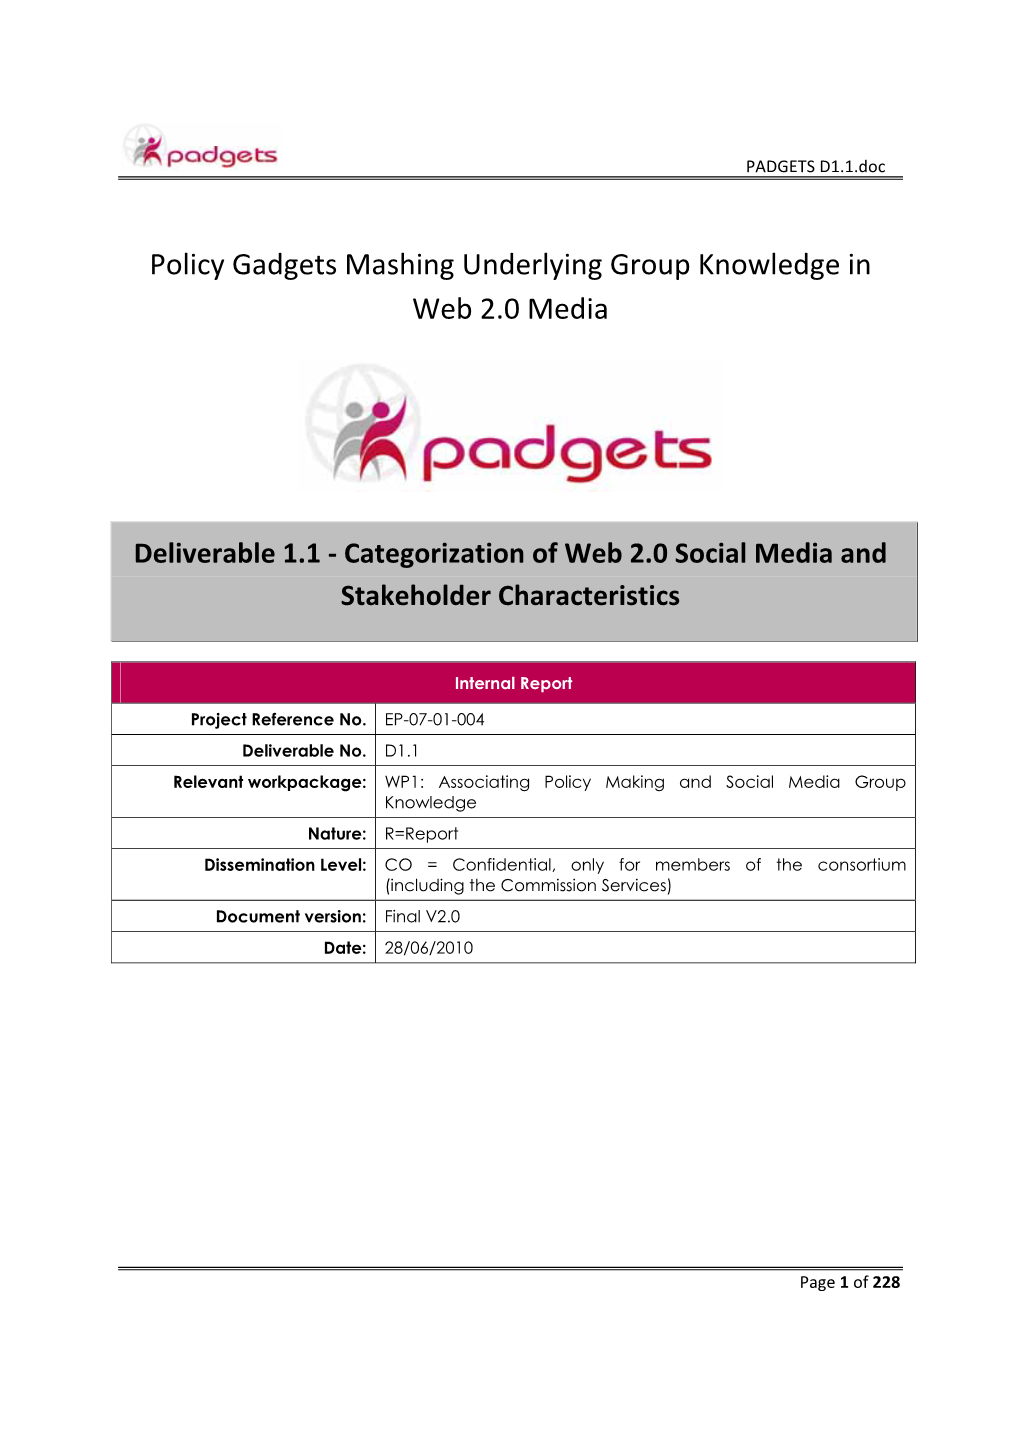 Policy Gadgets Mashing Underlying Group Knowledge in Web 2.0 Media